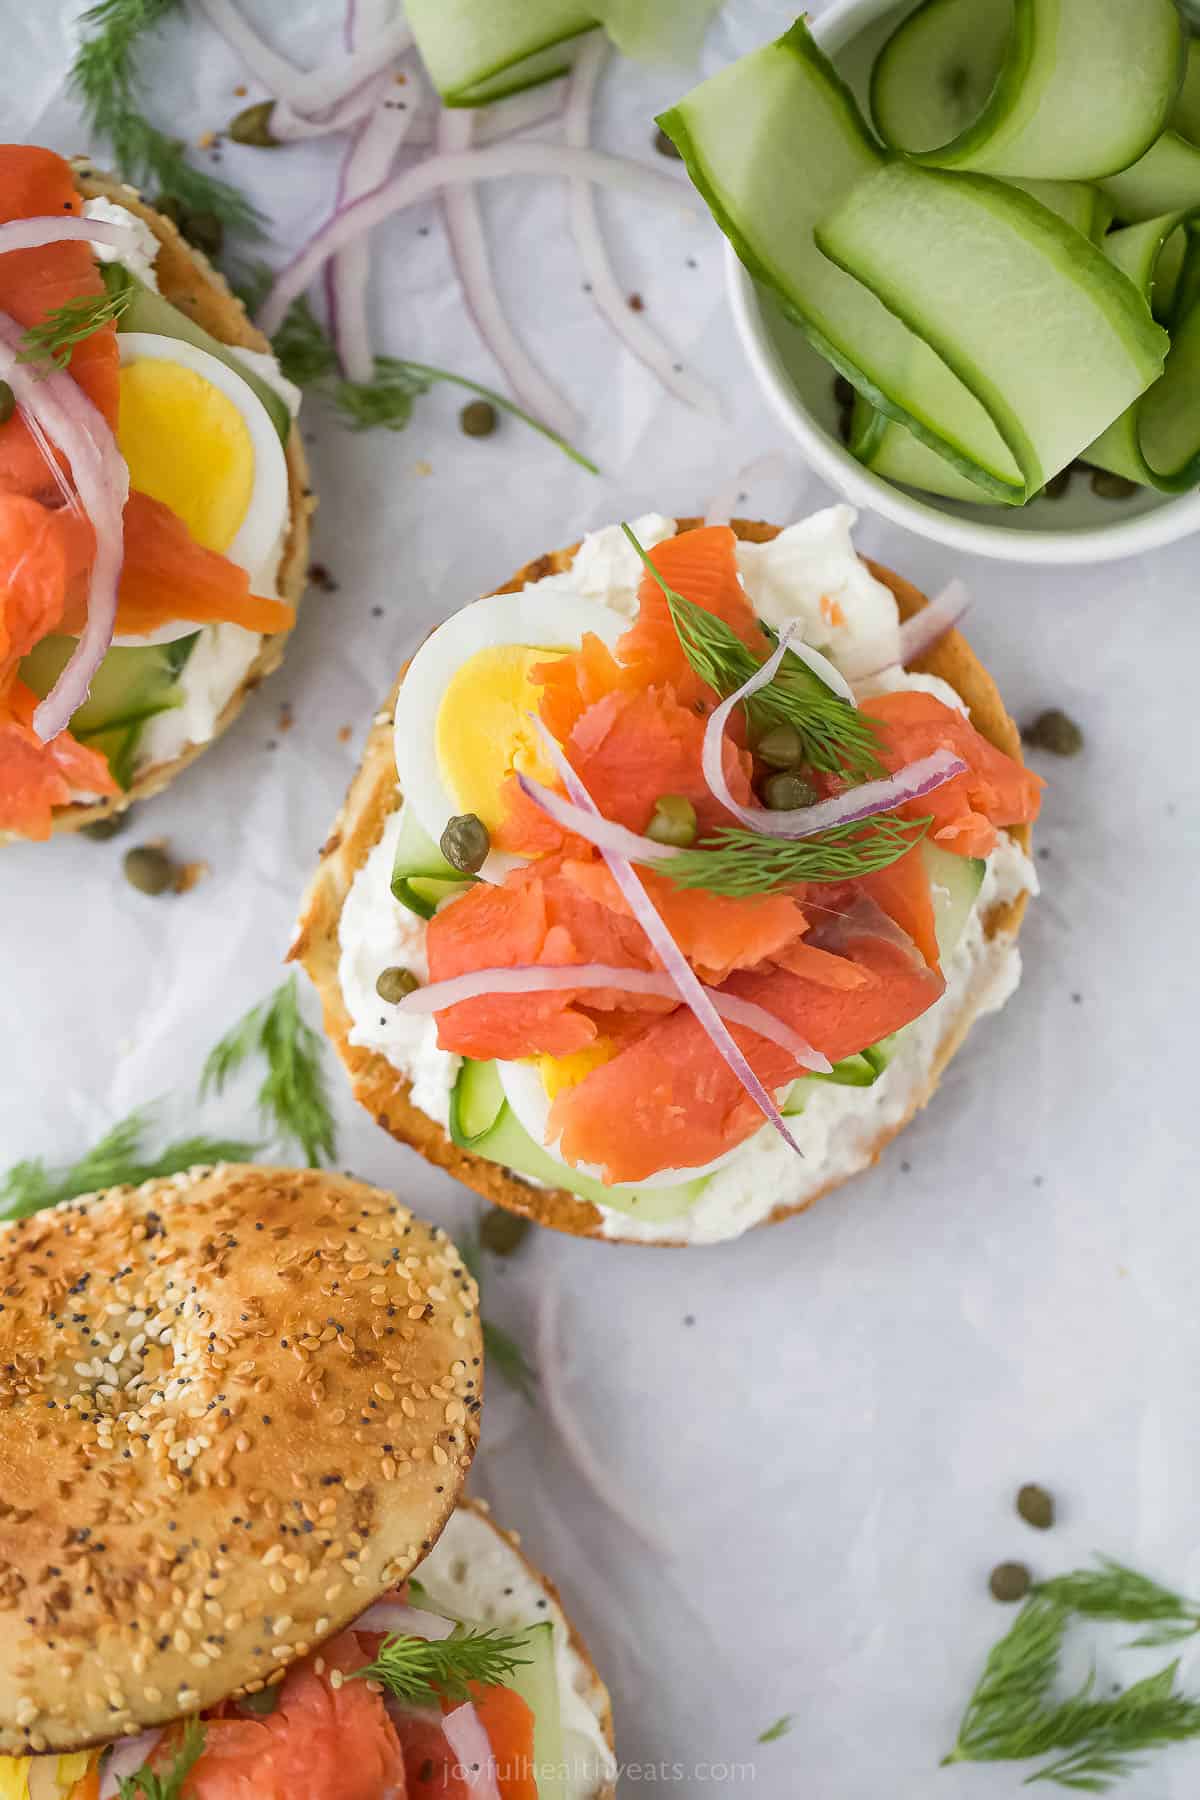 Open bagel and lox with sliced cucumbers on the side.